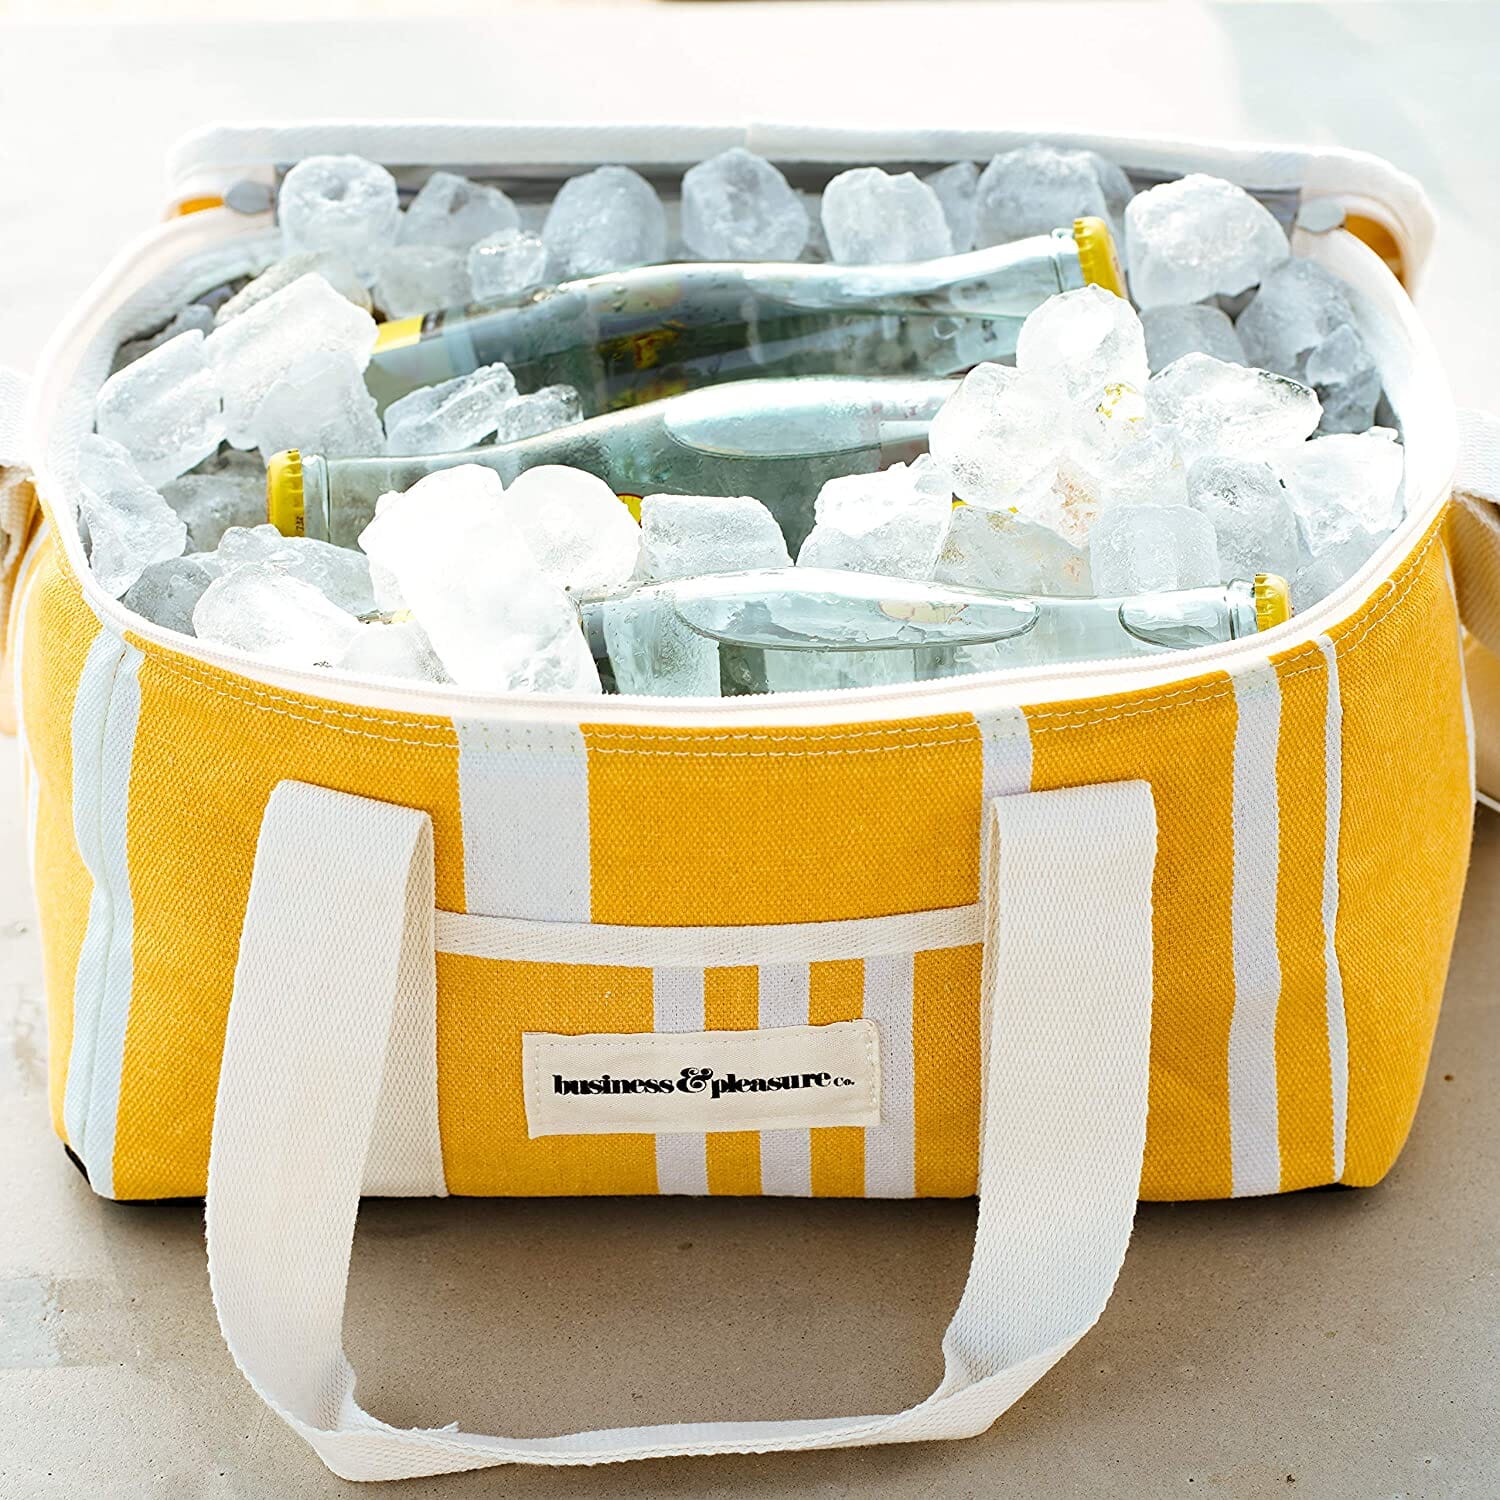 The Holiday Cooler Bag - FFF Yellow Stripe Holiday Cooler Business & Pleasure Co 